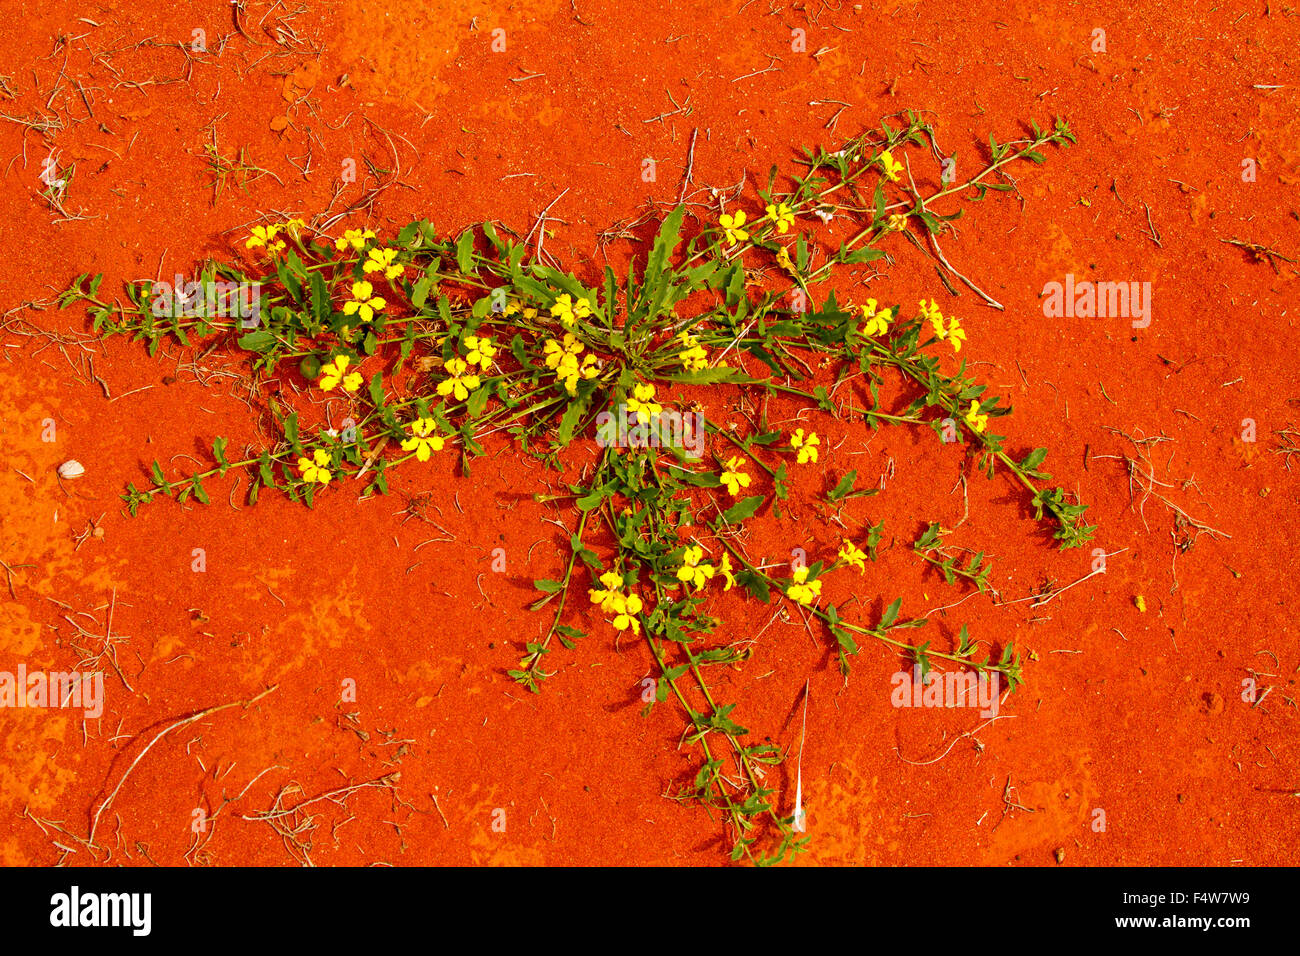 Yellow flowers & green leaves of Goodenia glabra, ground cover plant growing on red soil in outback Queensland Australia Stock Photo